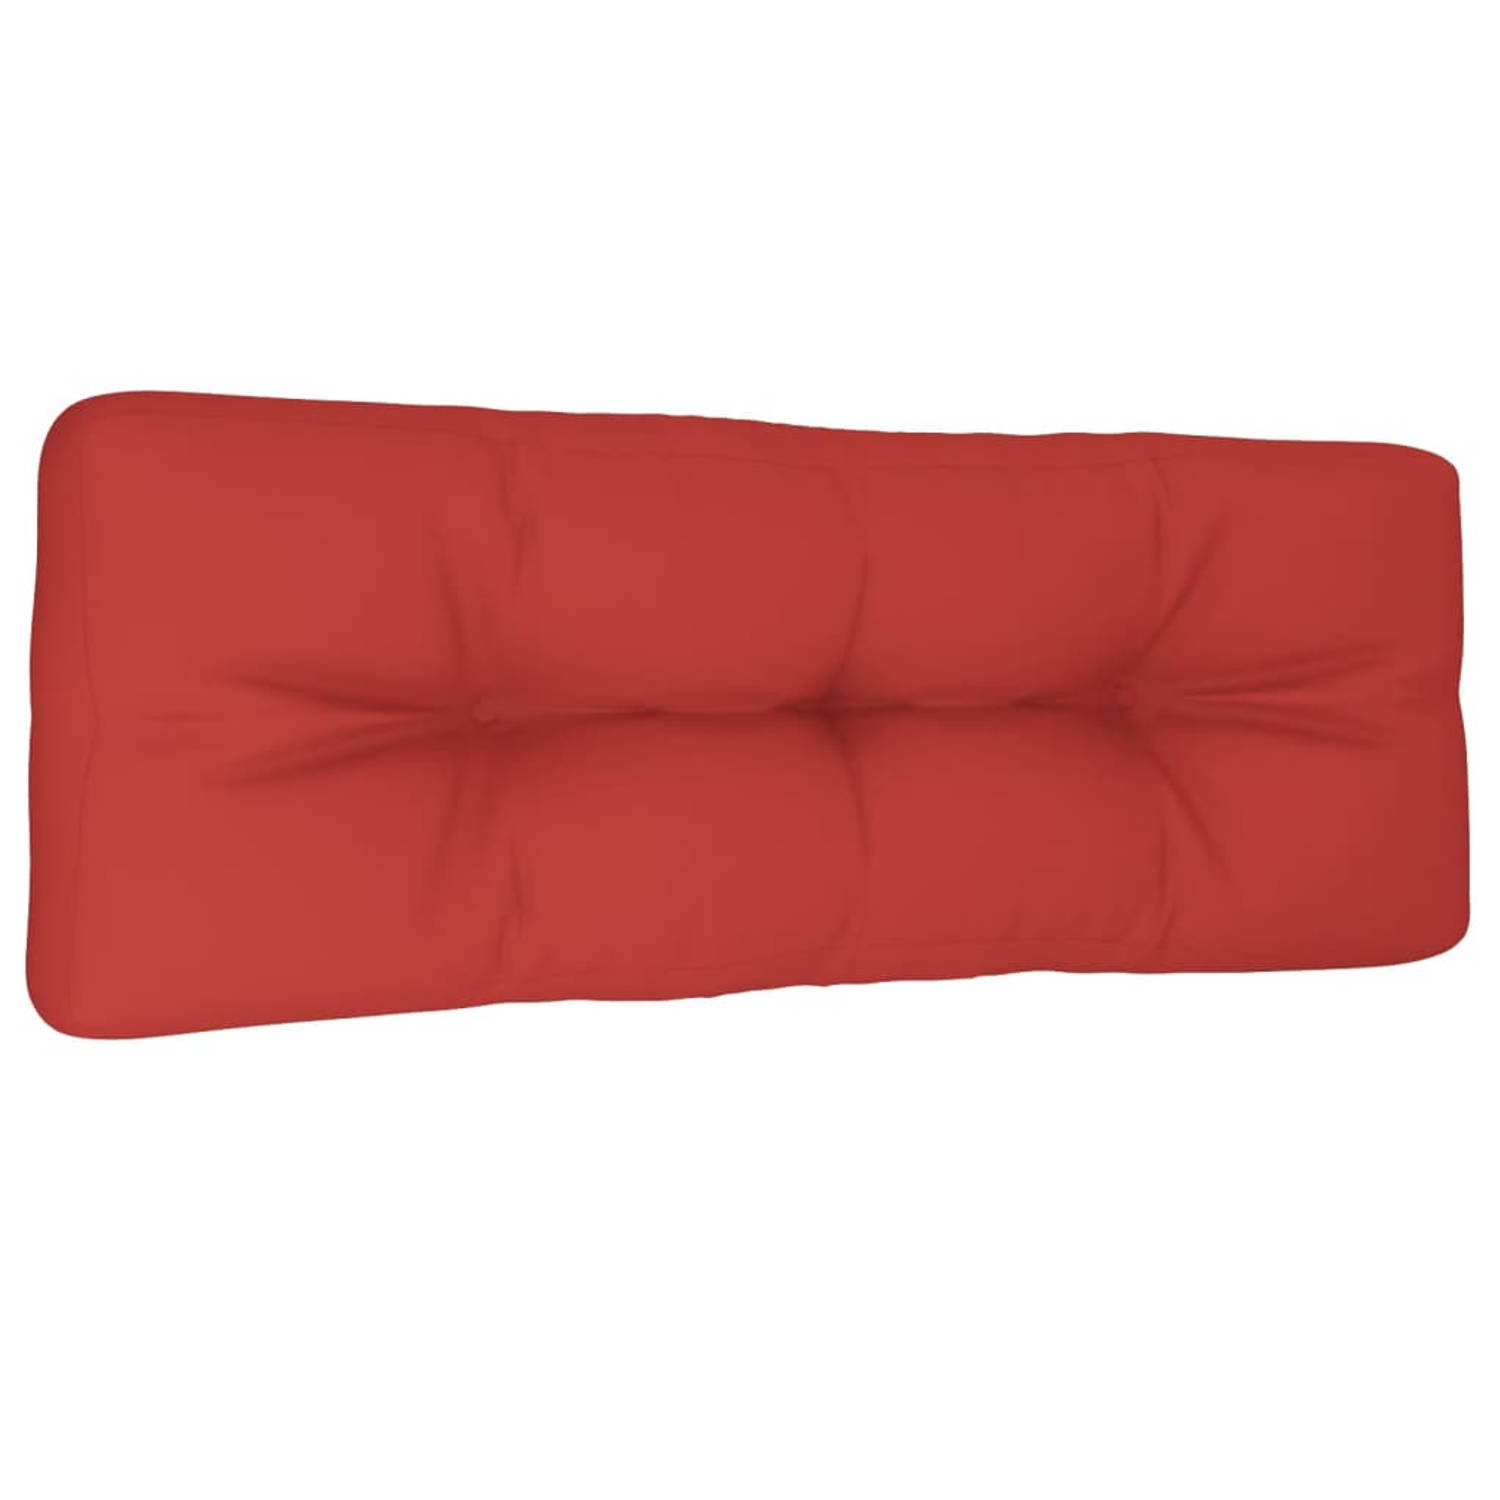 The Living Store Palletkussen - Rood - 120 x 40 x 12 cm - Polyester